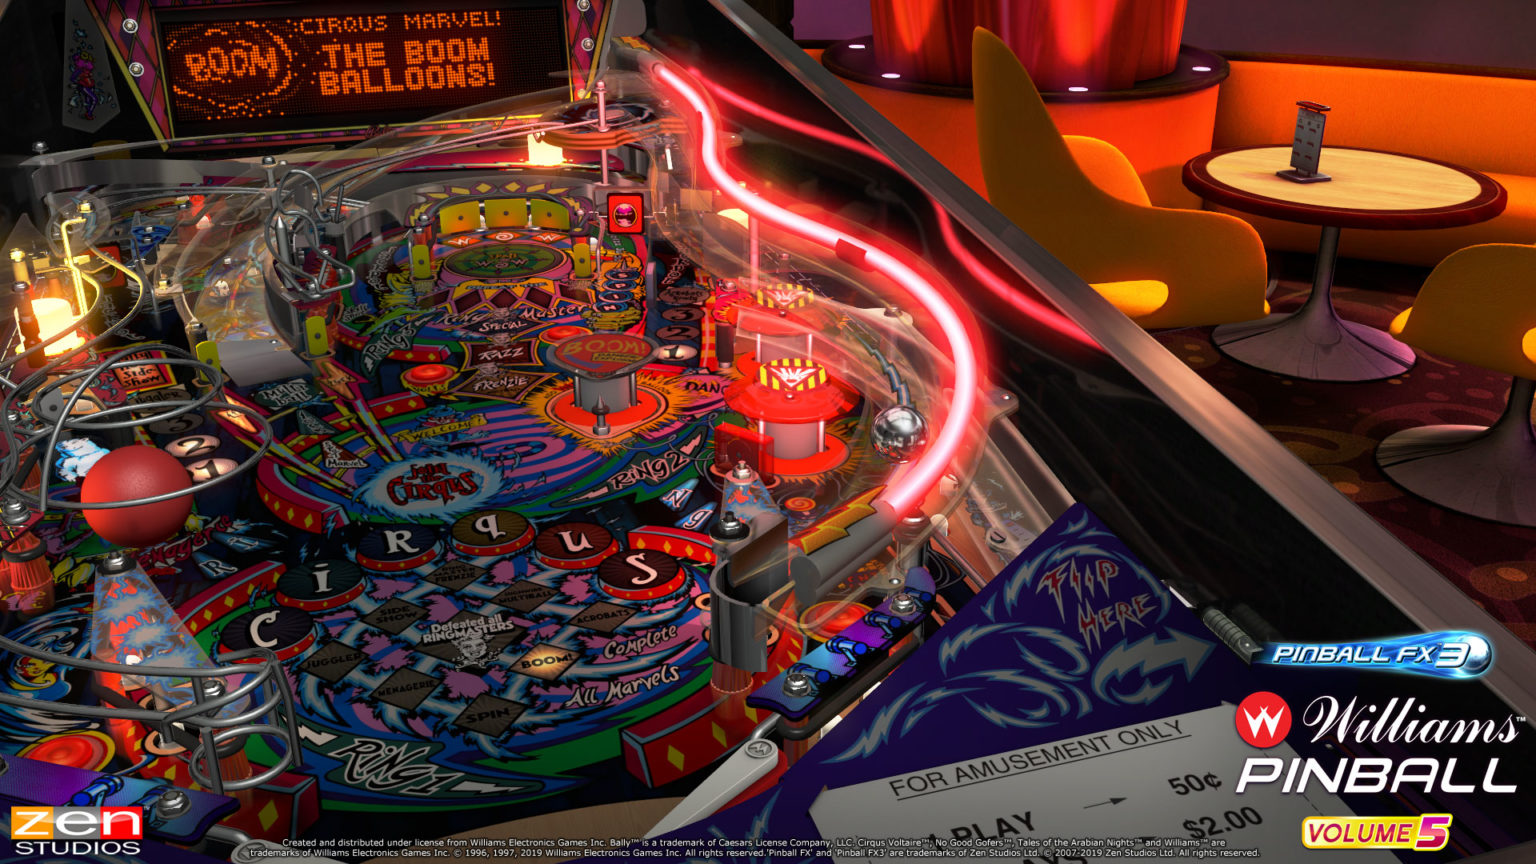 pinball fx3 only shows one friend score